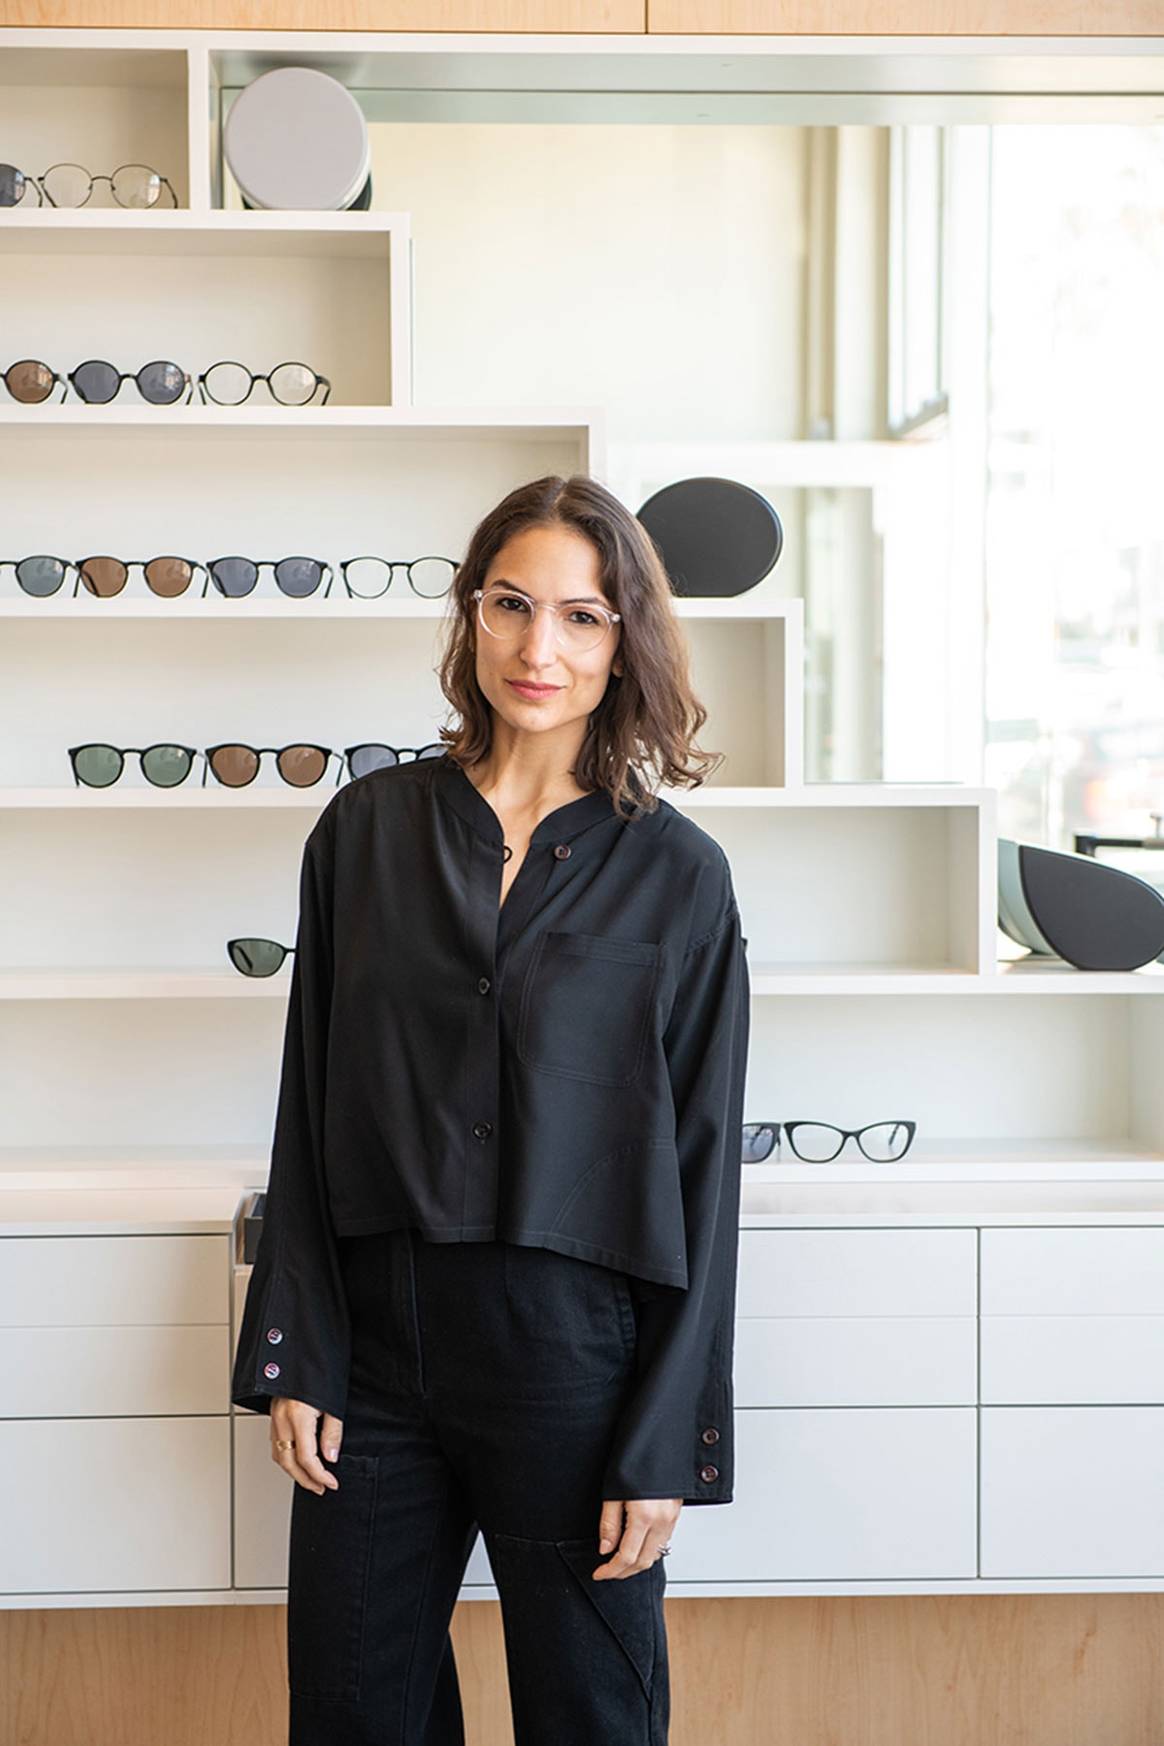 Meet Zak., the brand changing how to look at eye care and eyewear